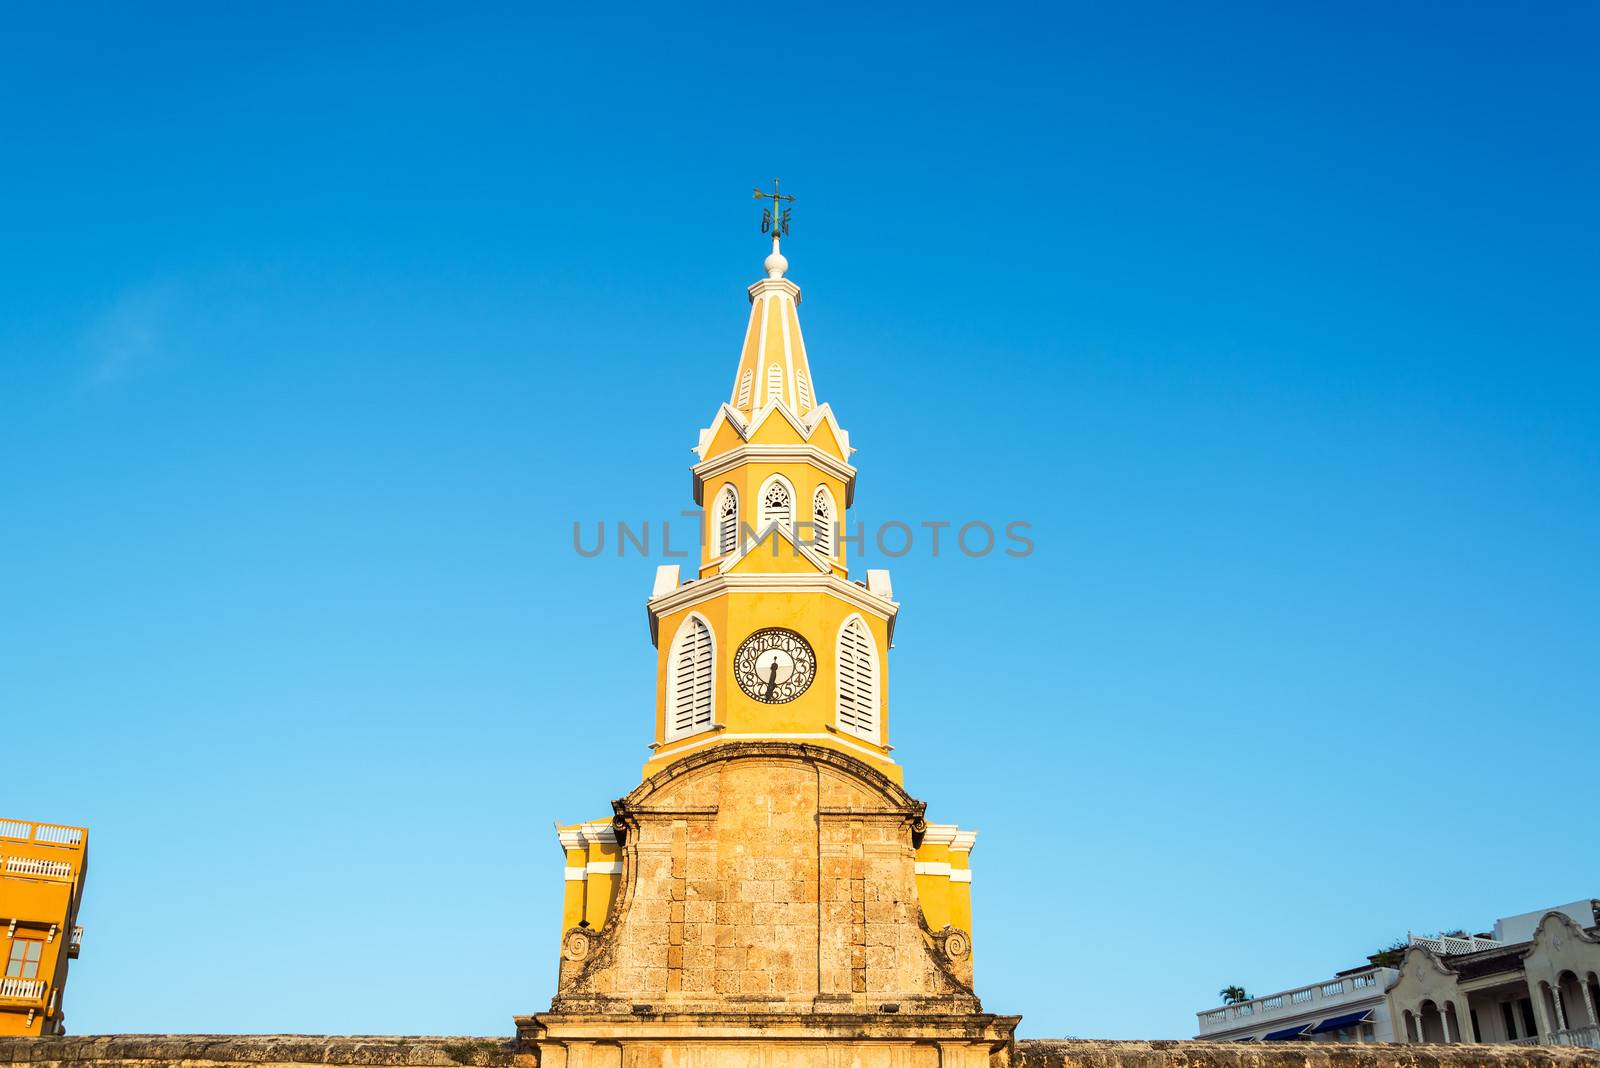 The yellow clock tower marking the entrance to the old town of Cartagena, Colombia